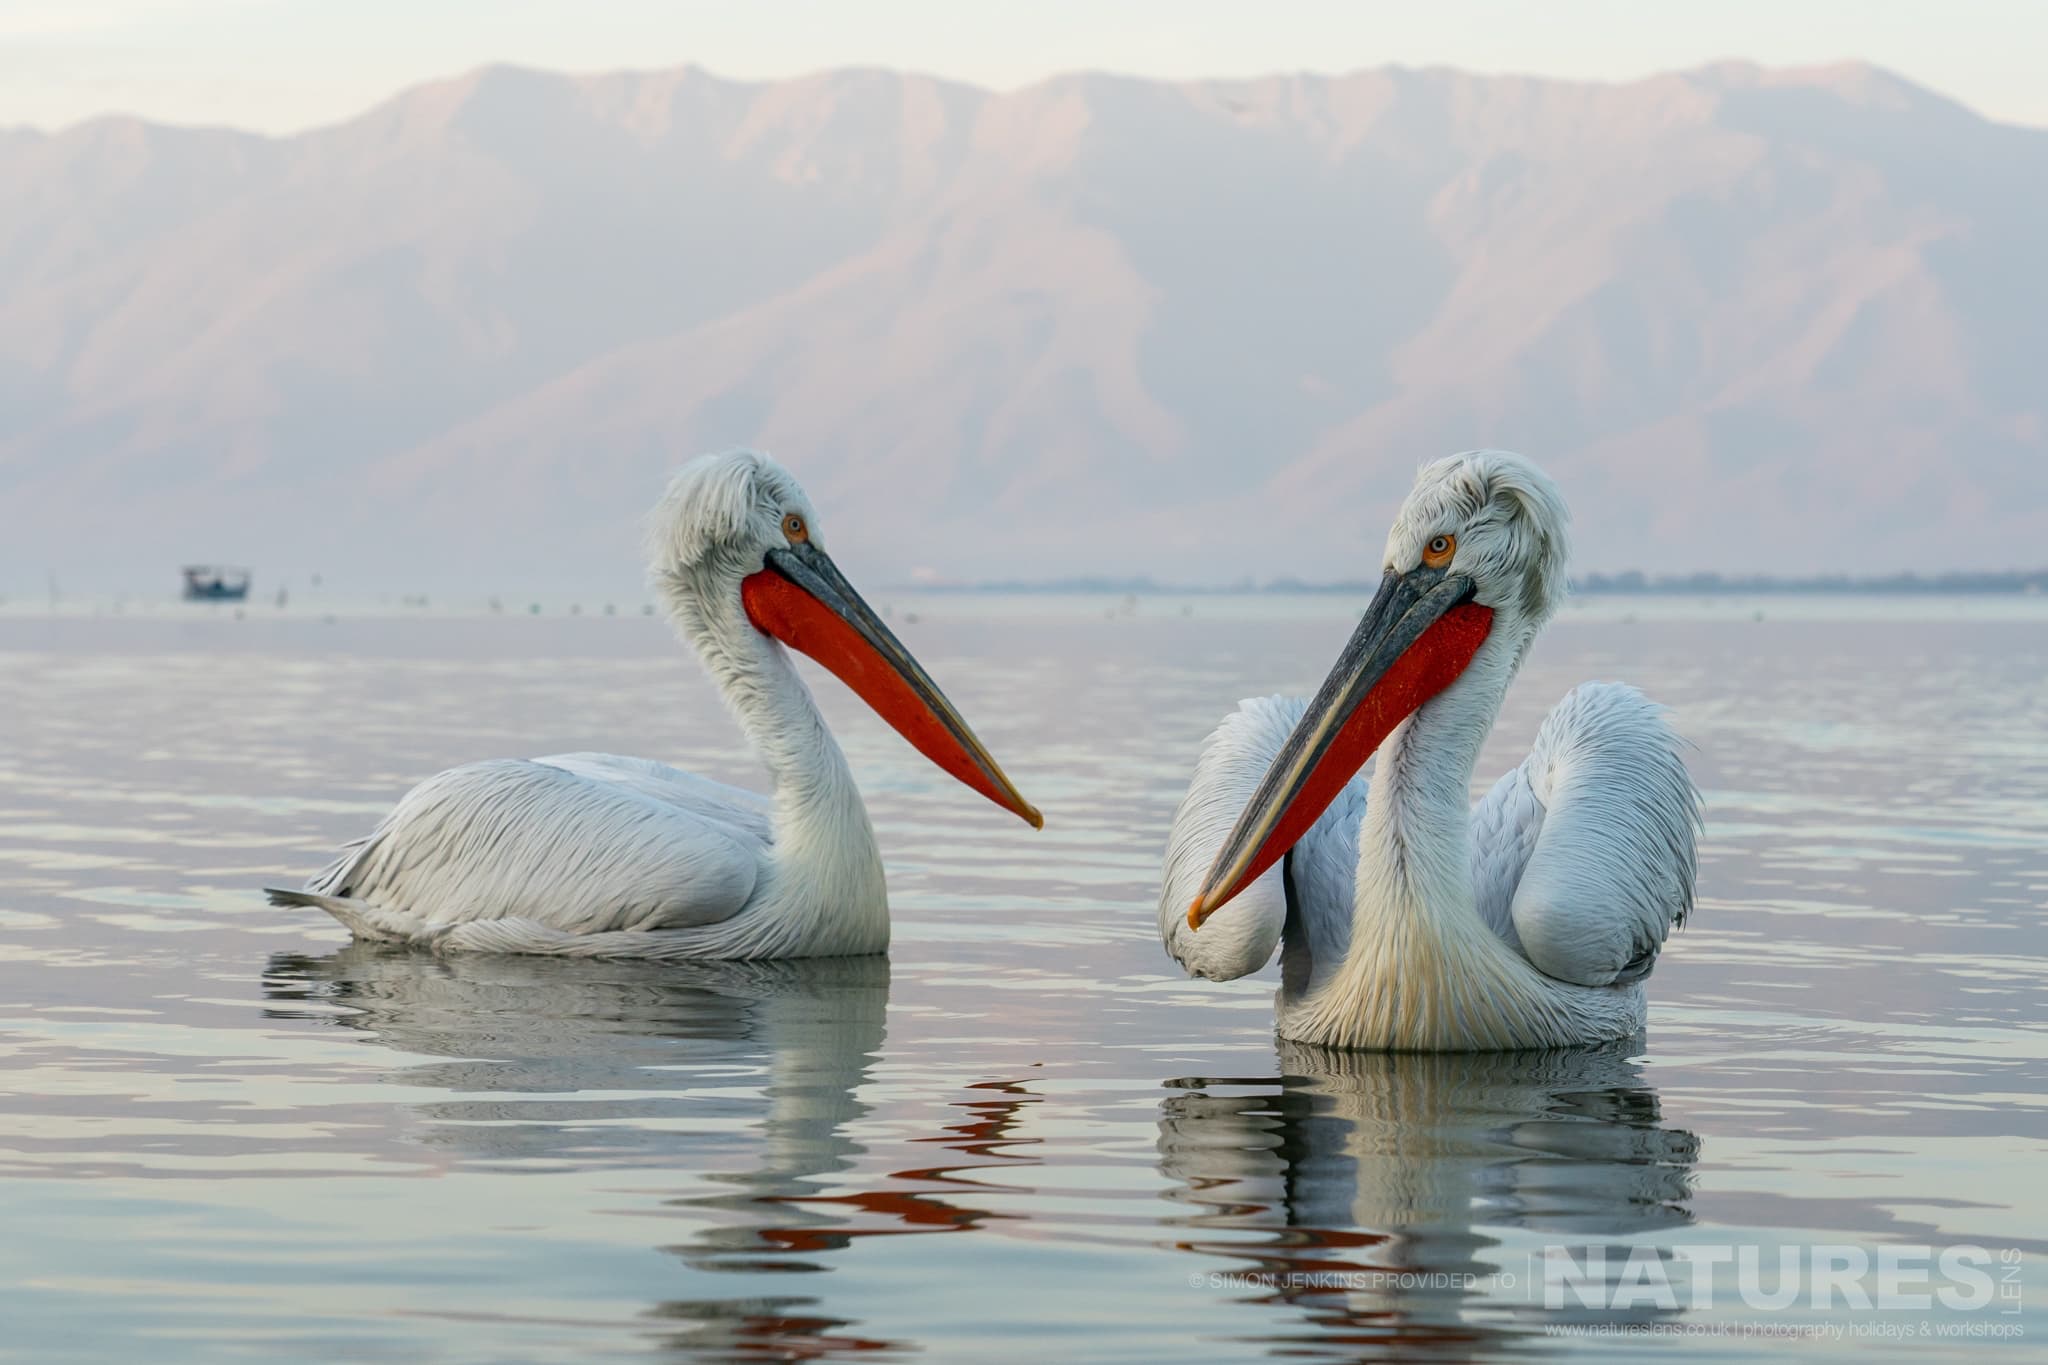 A Pair Of Lake Kerkini's Pelicans Drift On The Waters Of The Lake With The Mountains Behind